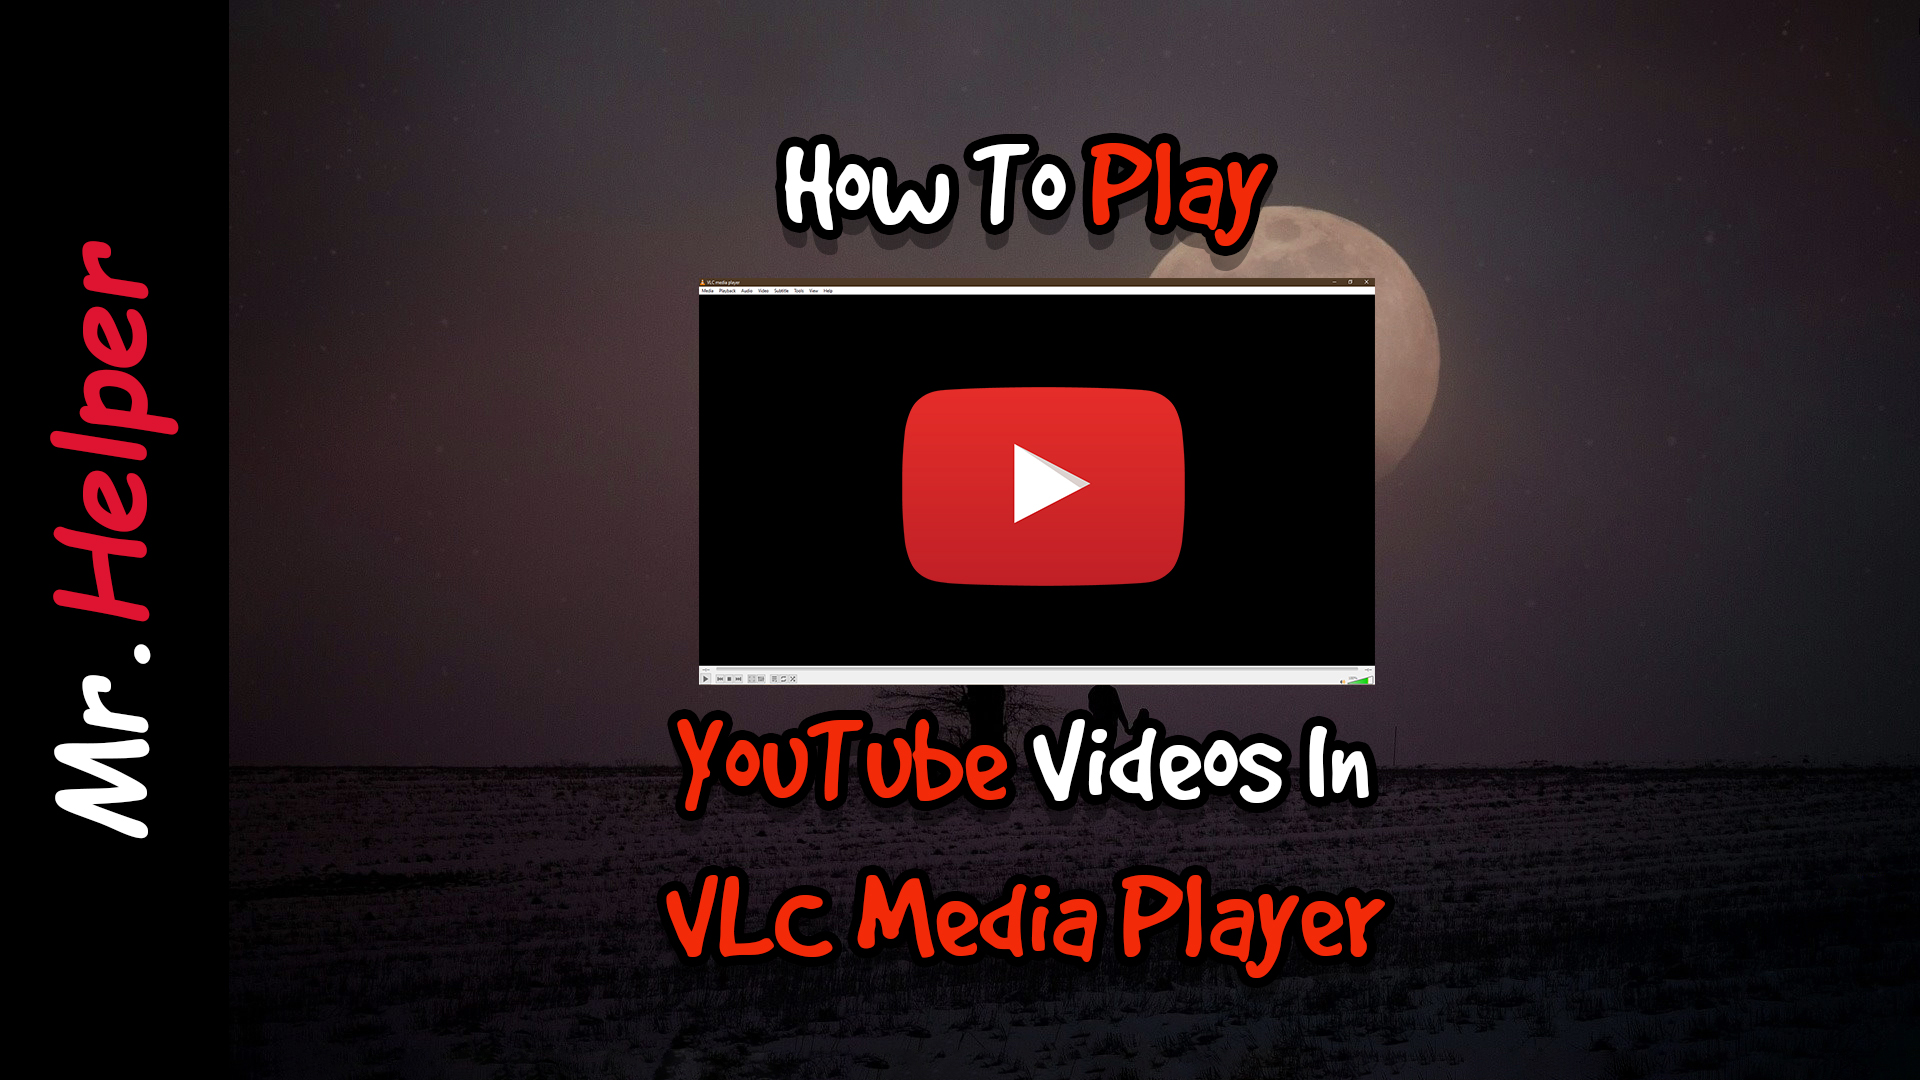 how to download a video from youtube using vlc media player